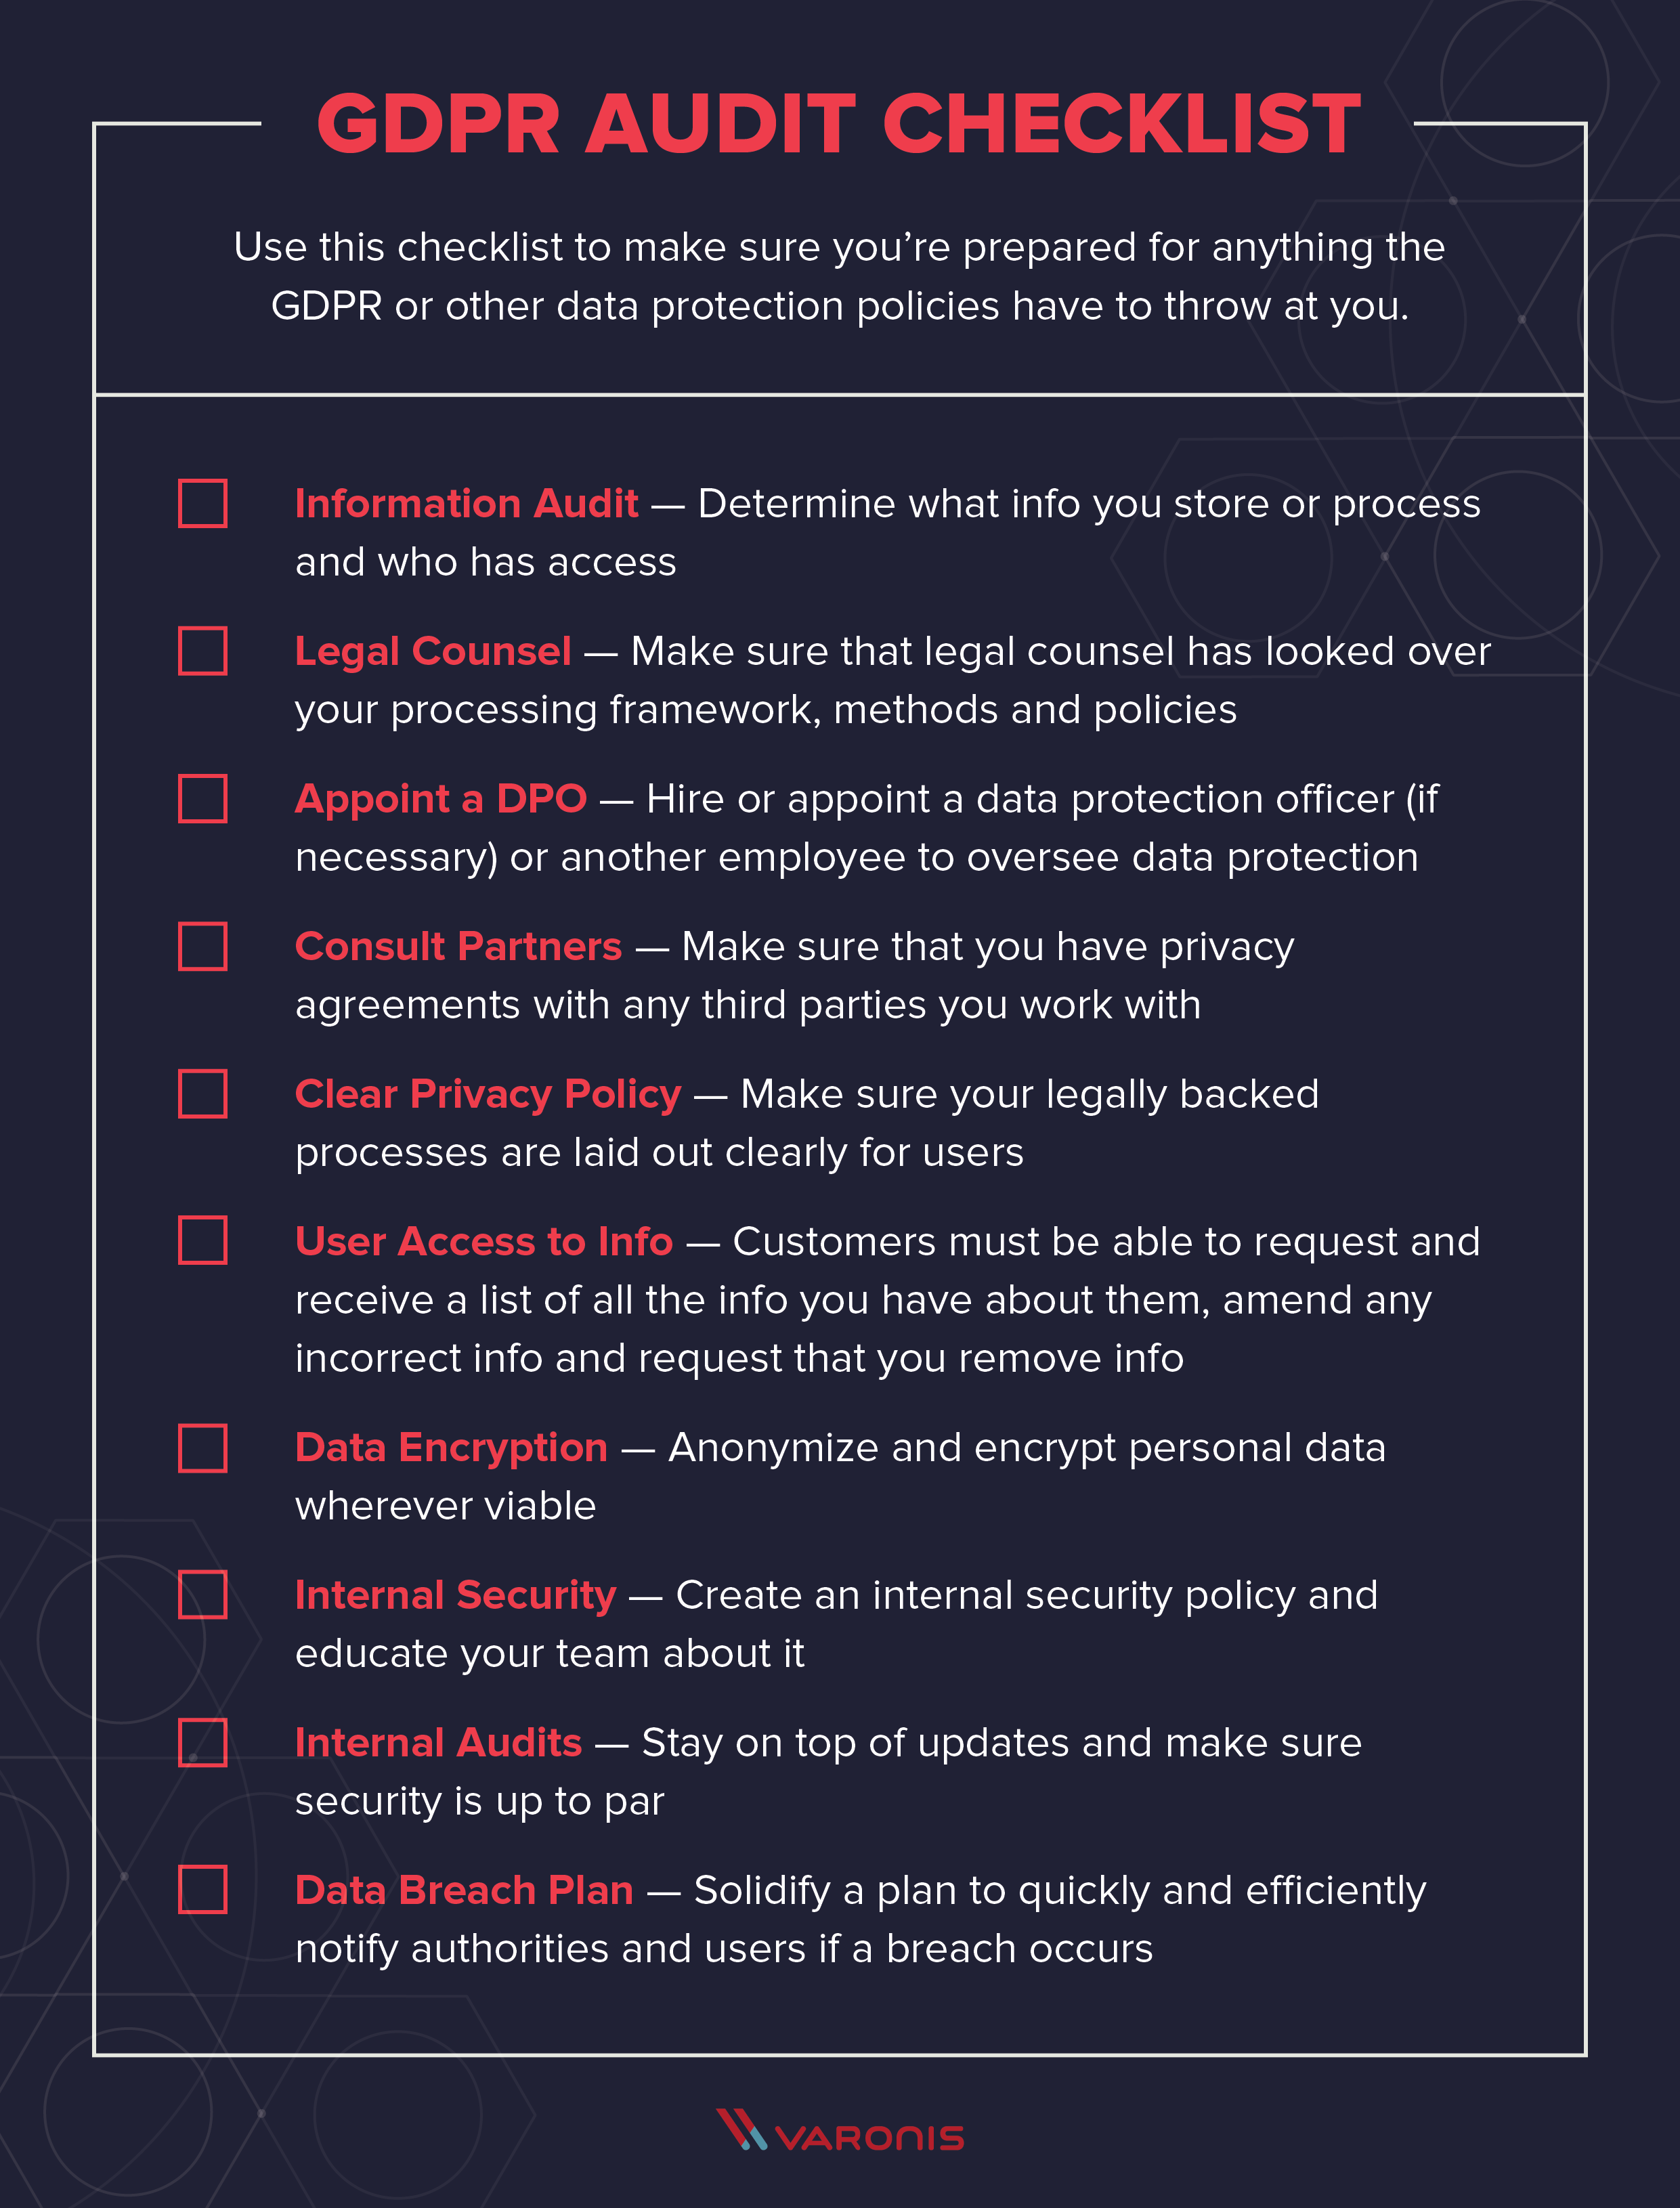 Title: GDPR Audit Checklist Subtext: Use this checklist to make sure you’re prepared for anything the GDPR or other data protection policies have to throw at you. Copy: Information Audit — determine what info you store or process and who has access Legal Counsel — make sure that legal counsel has looked over your processing framework, methods and policies Appoint a DPO — hire or appoint a data protection officer (if necessary) or another employee to oversee data protection Consult Partners — make sure that you have privacy agreements with any third parties you work with Clear Privacy Policy — make sure your legally backed processes are laid out clearly for users User Access to Info — customers must be able to request and receive a list of all the info you have about them, amend any incorrect info and request that you remove info Data Encryption — anonymize and encrypt personal data wherever viable Internal Security — create an internal security policy and educate your team about it Internal Audits — stay on top of updates and make sure security is up to par Data Breach Plan — solidify a plan to quickly and efficiently notify authorities and users if a breach occurs